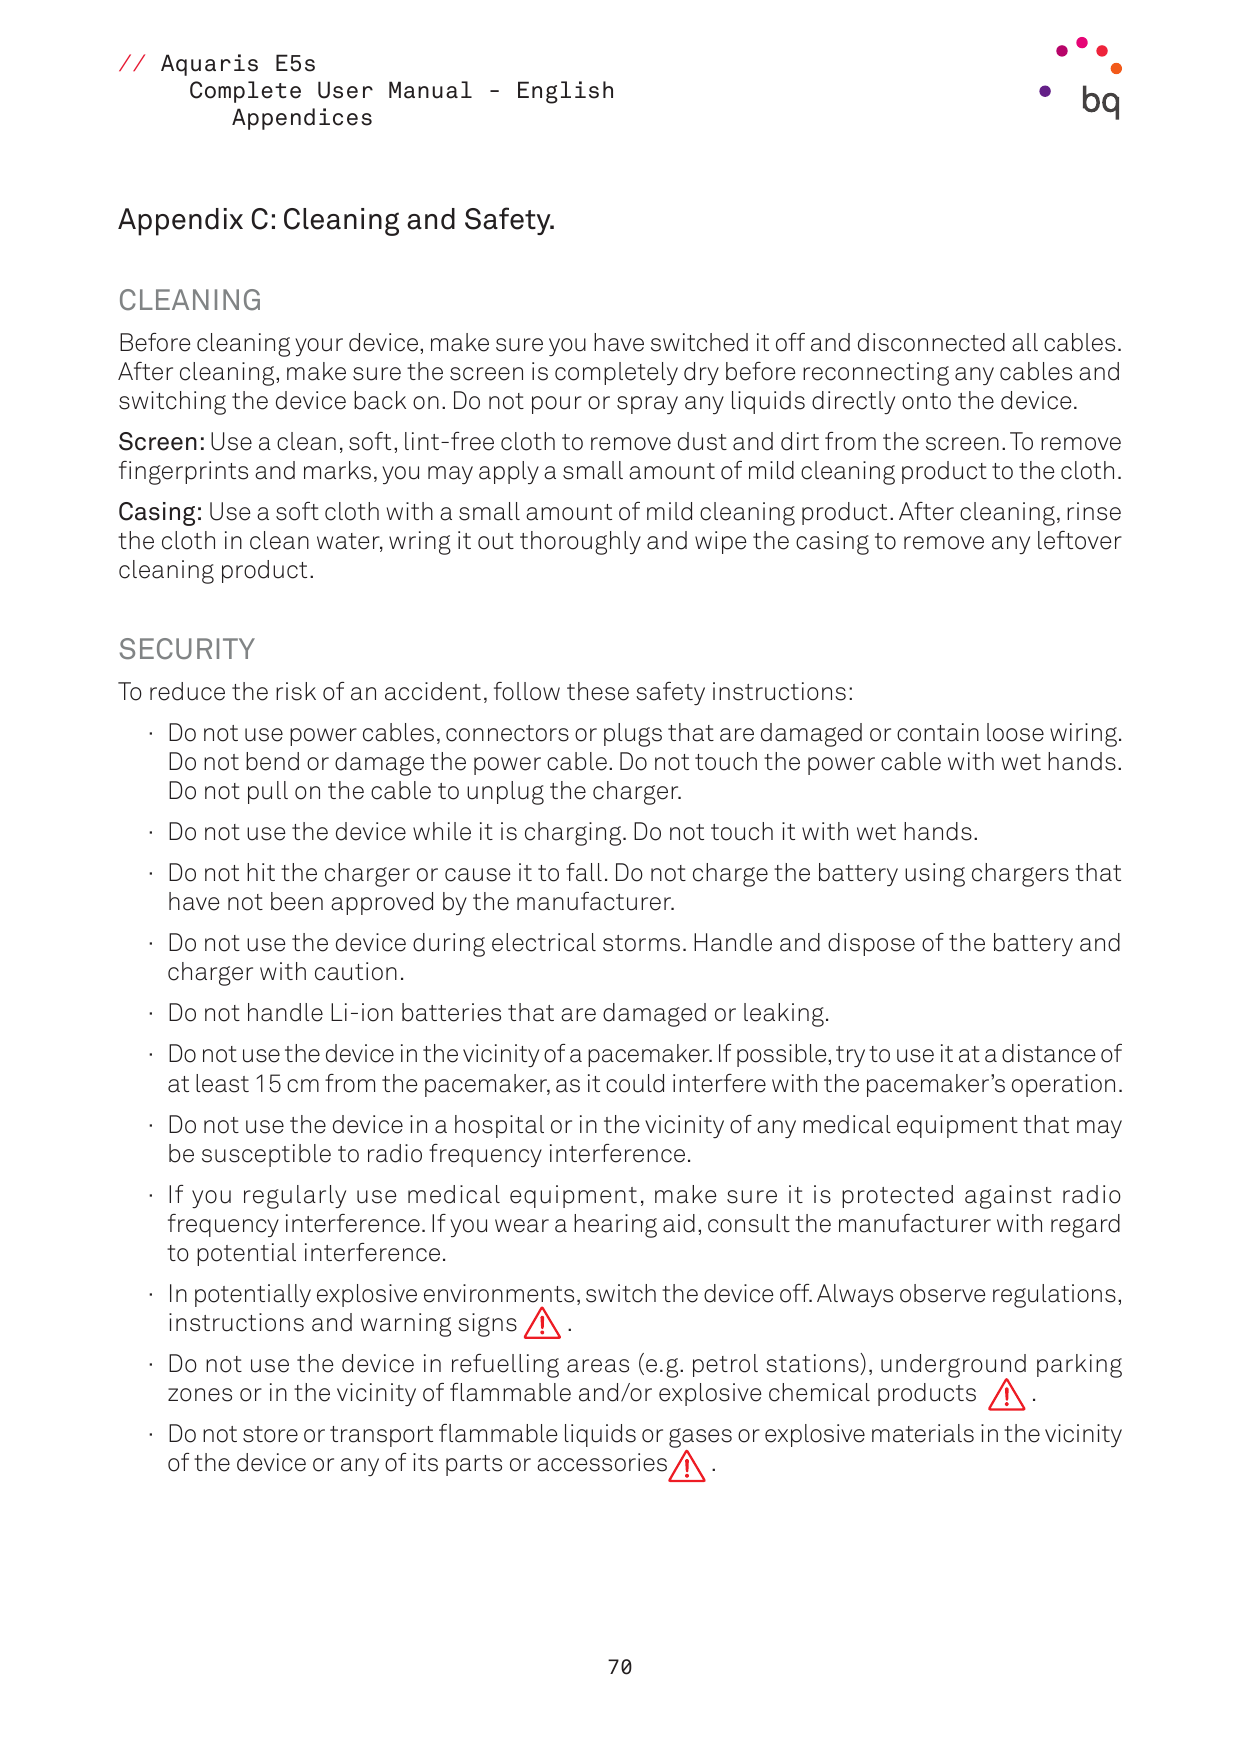 // Aquaris E5sComplete User Manual - EnglishAppendicesAppendix C: Cleaning and Safety.CLEANINGBefore cleaning your device, make 